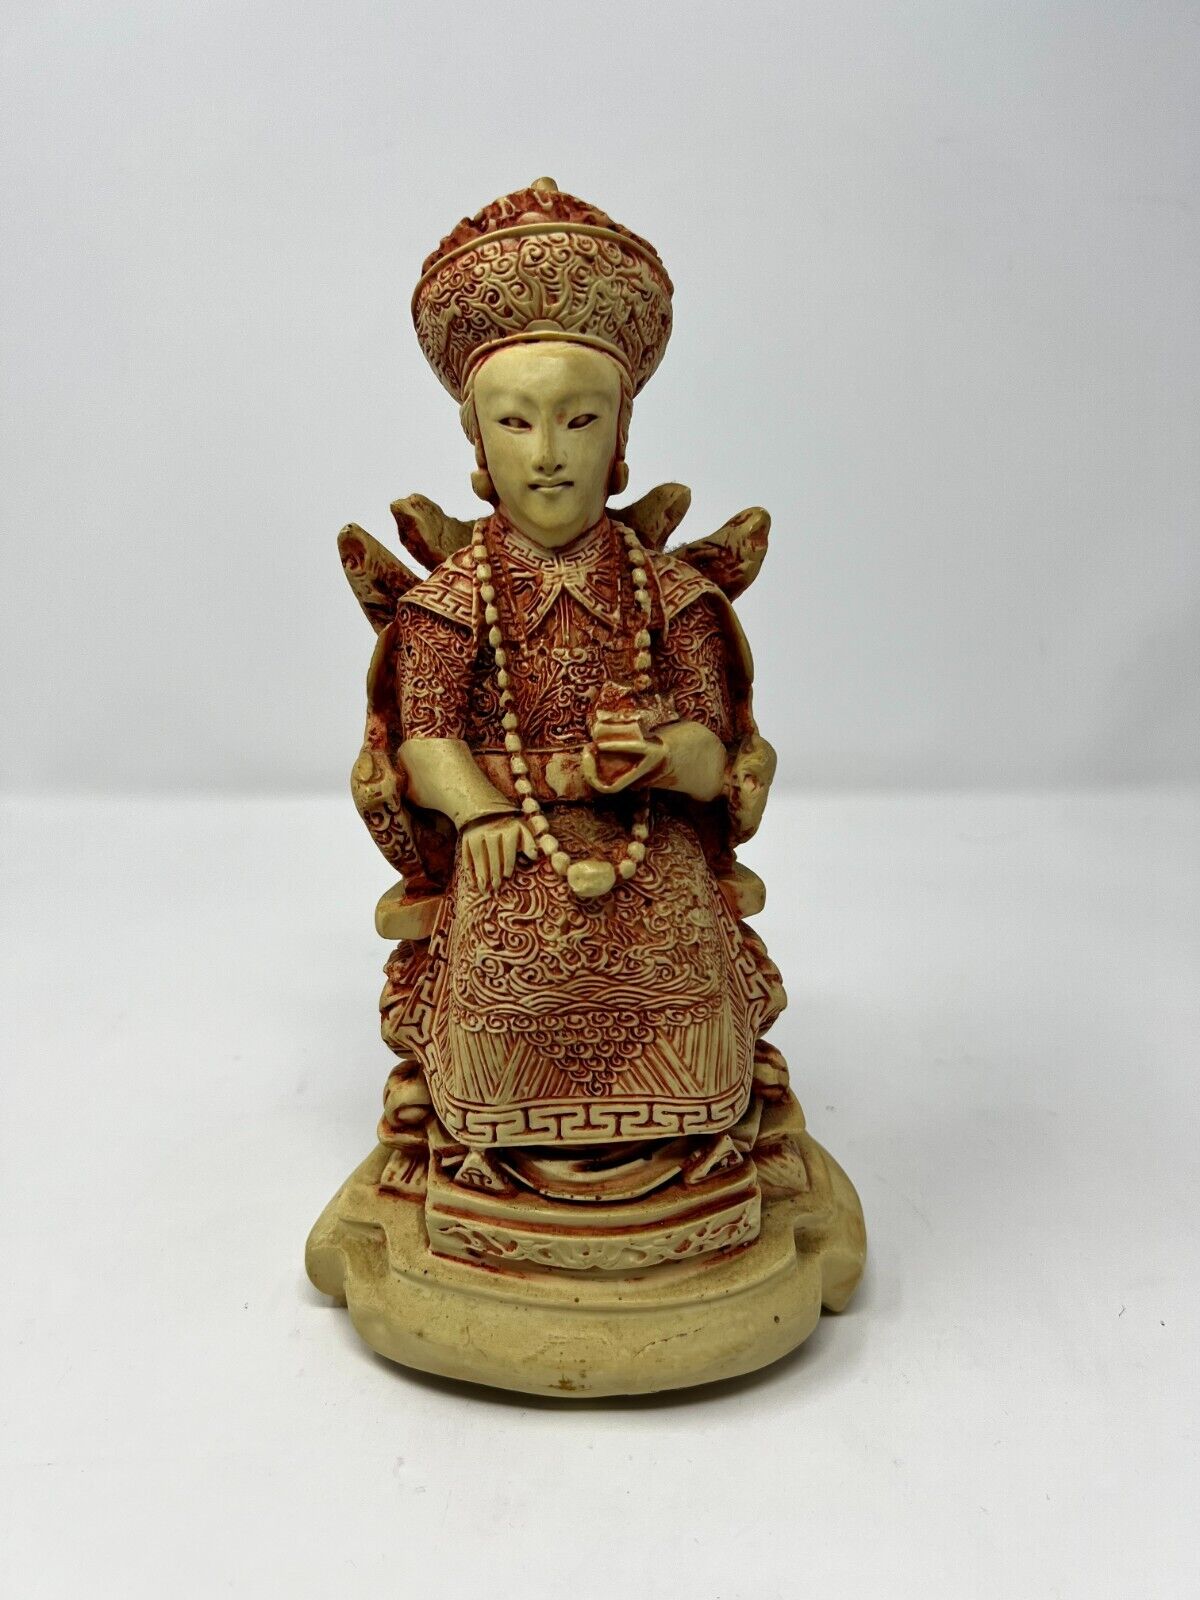 Vintage Chinese Carved Resin Emperor Statue Figurine